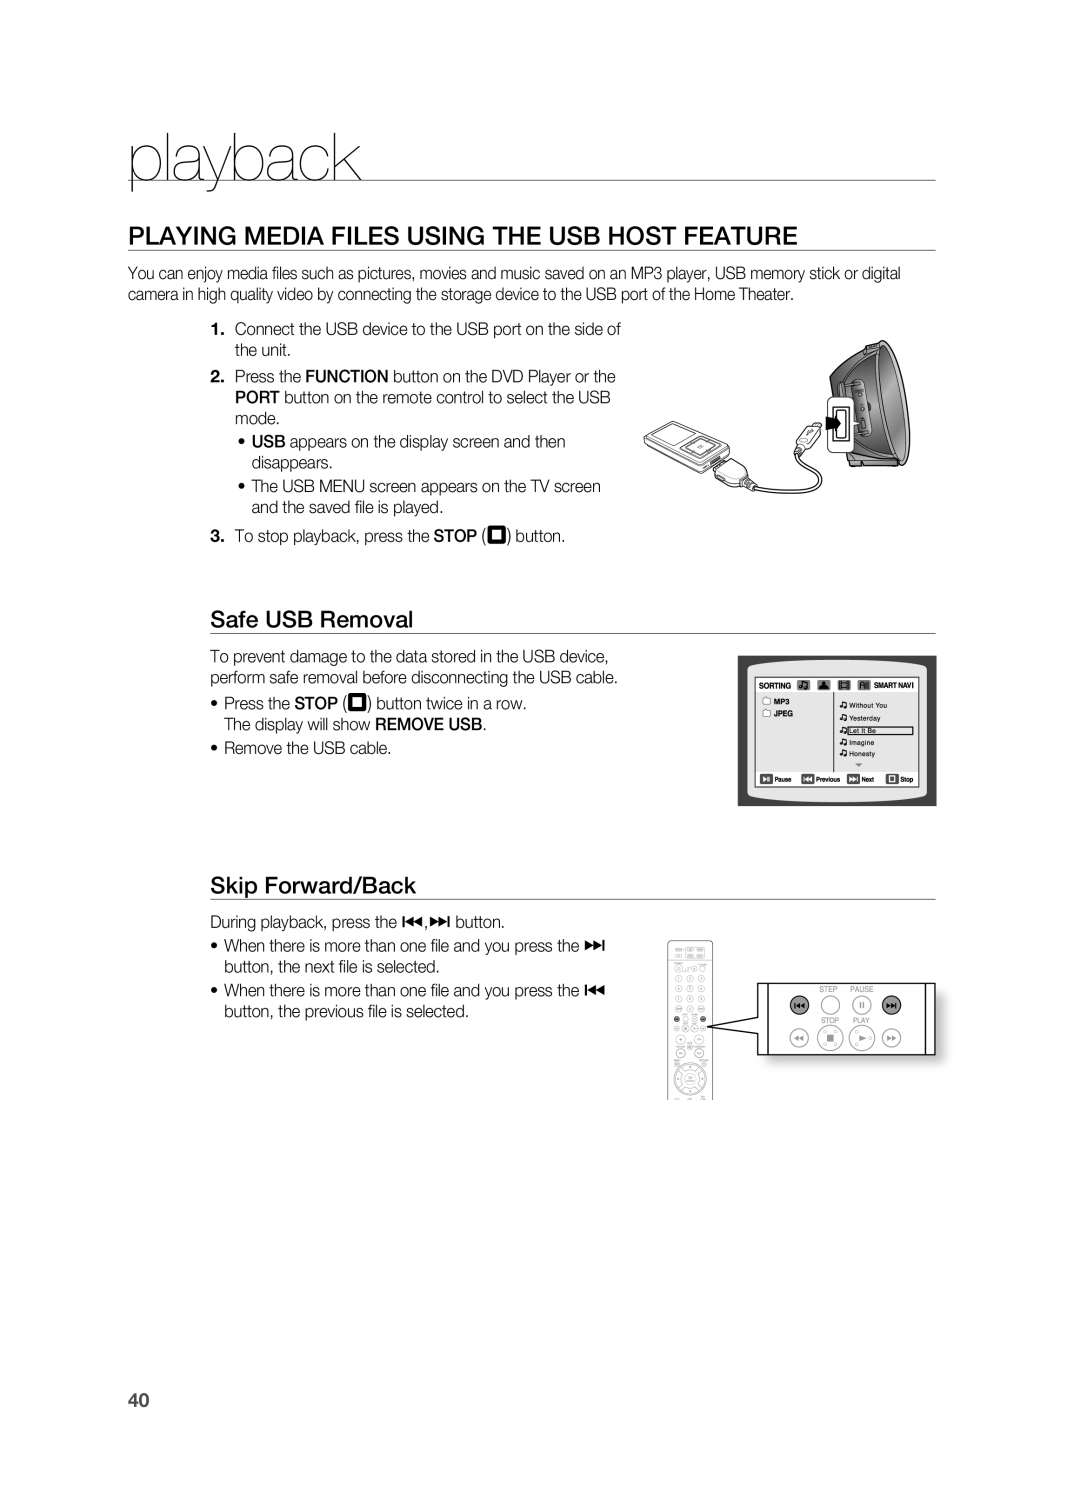 Samsung HT-A100 user manual PlAYINg MEDIA FIlES USINg THE USB HOST FEATUrE, Safe USB removal, playback, Skip Forward/Back 